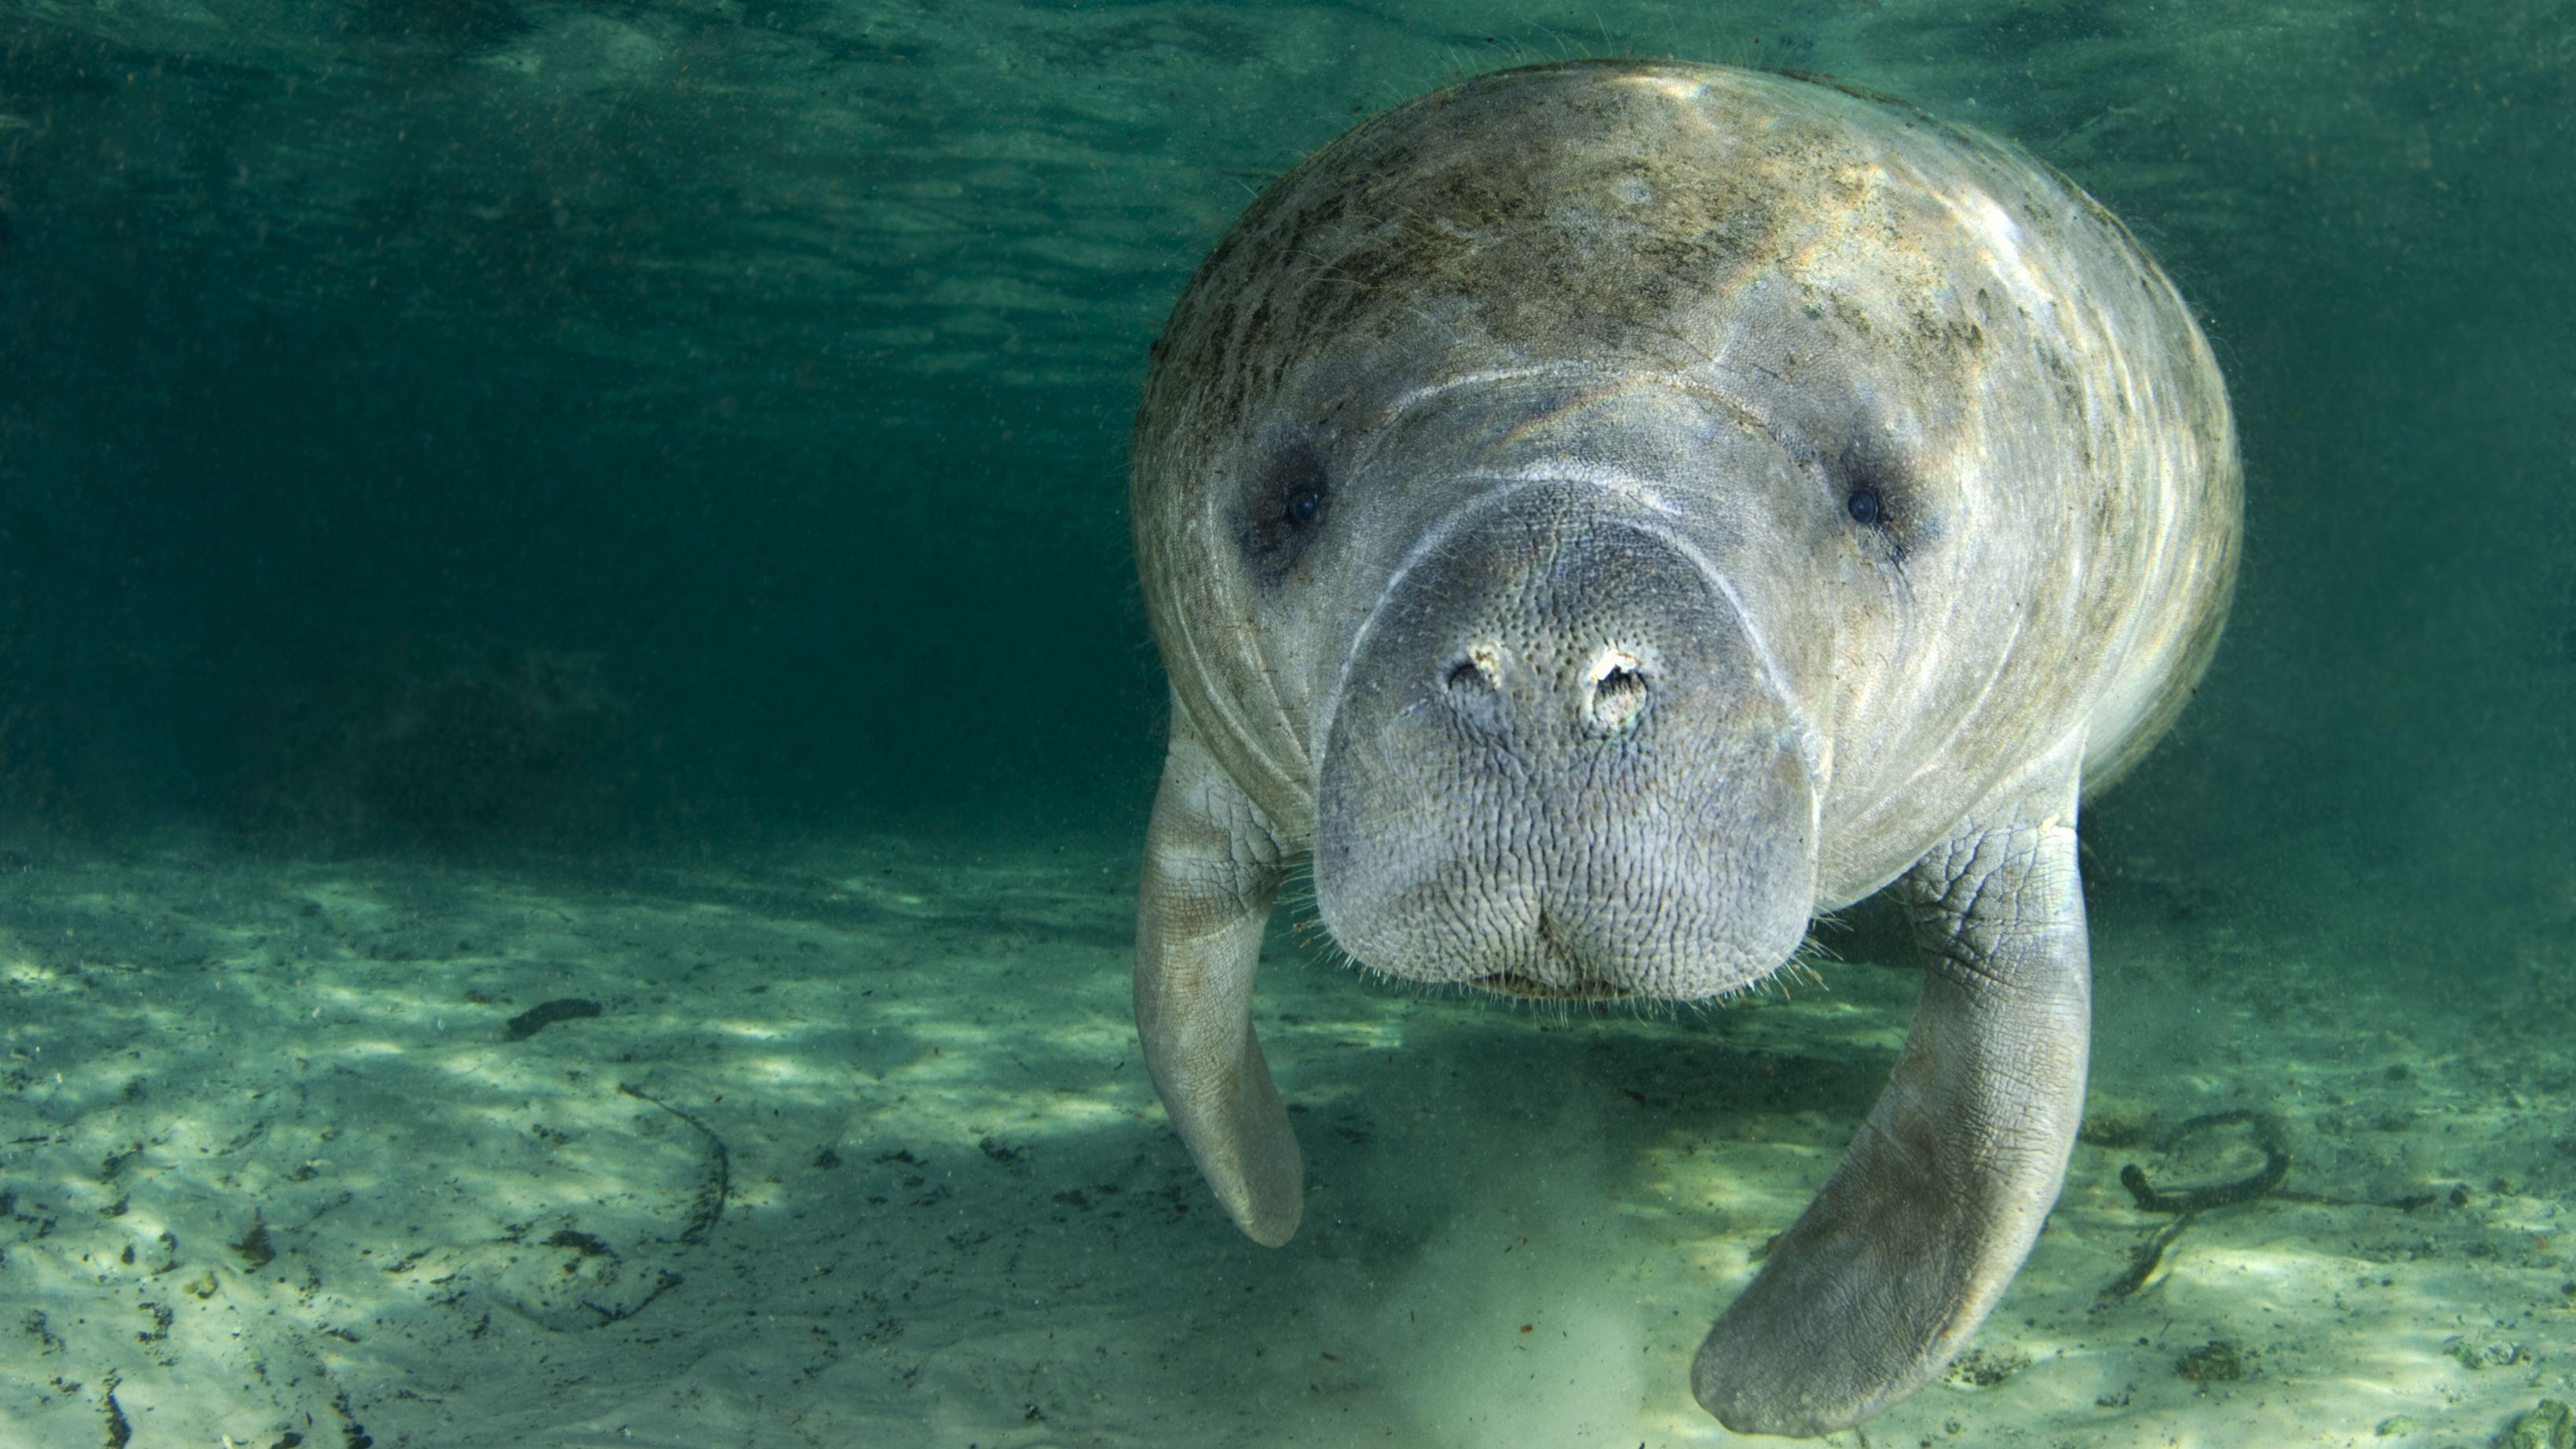 Manatee Wallpapers Top Free Manatee Backgrounds Wallpaperaccess Images, Photos, Reviews